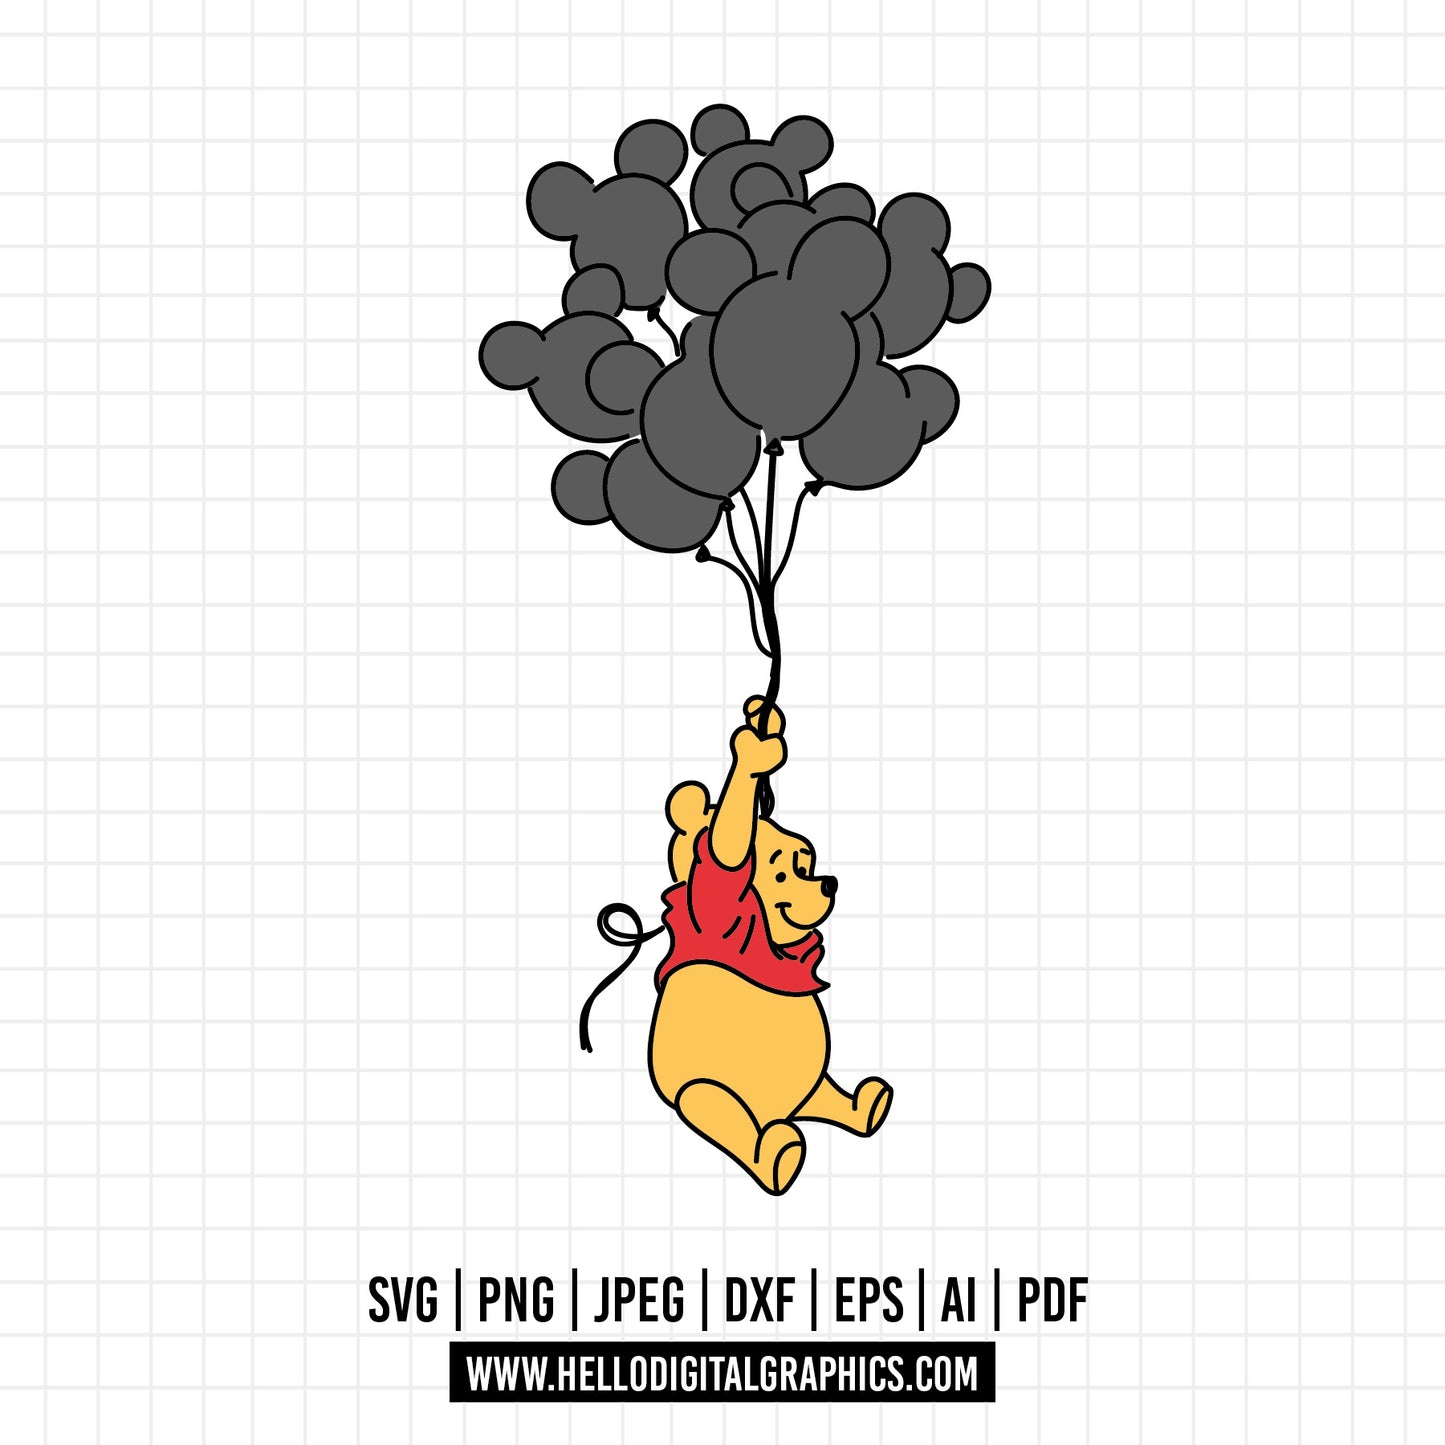 COD1121 Winnie the pooh svg, Winnie The Pooh With Balloon, Pooh Party Supplies